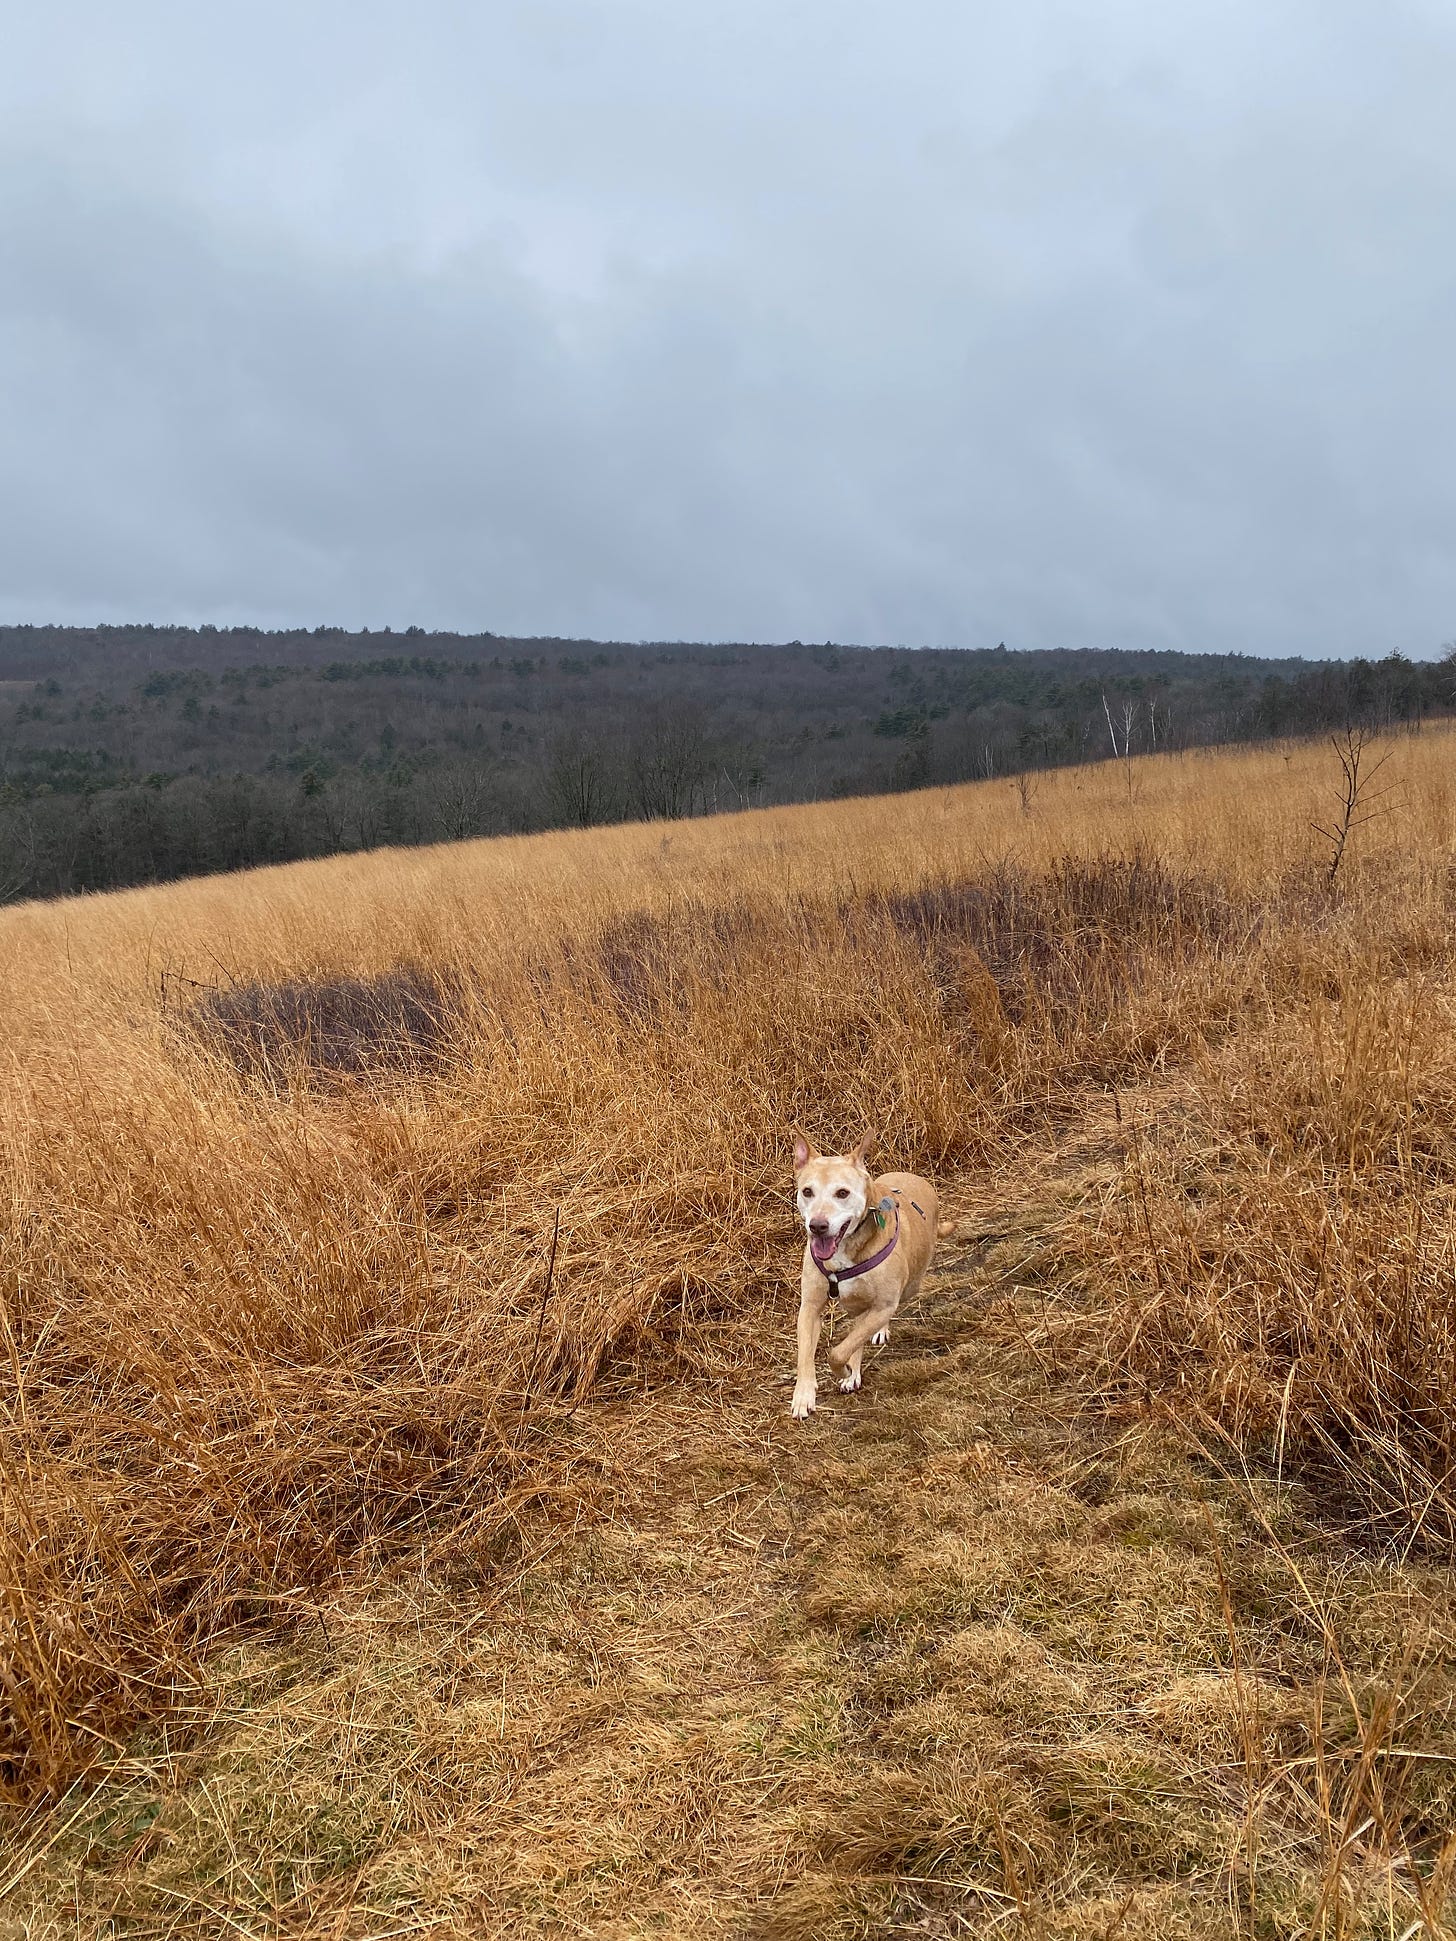 Nessa running through a brown field on a ridgetop on a grey day. Her ears are back, legs extended, mouth open.